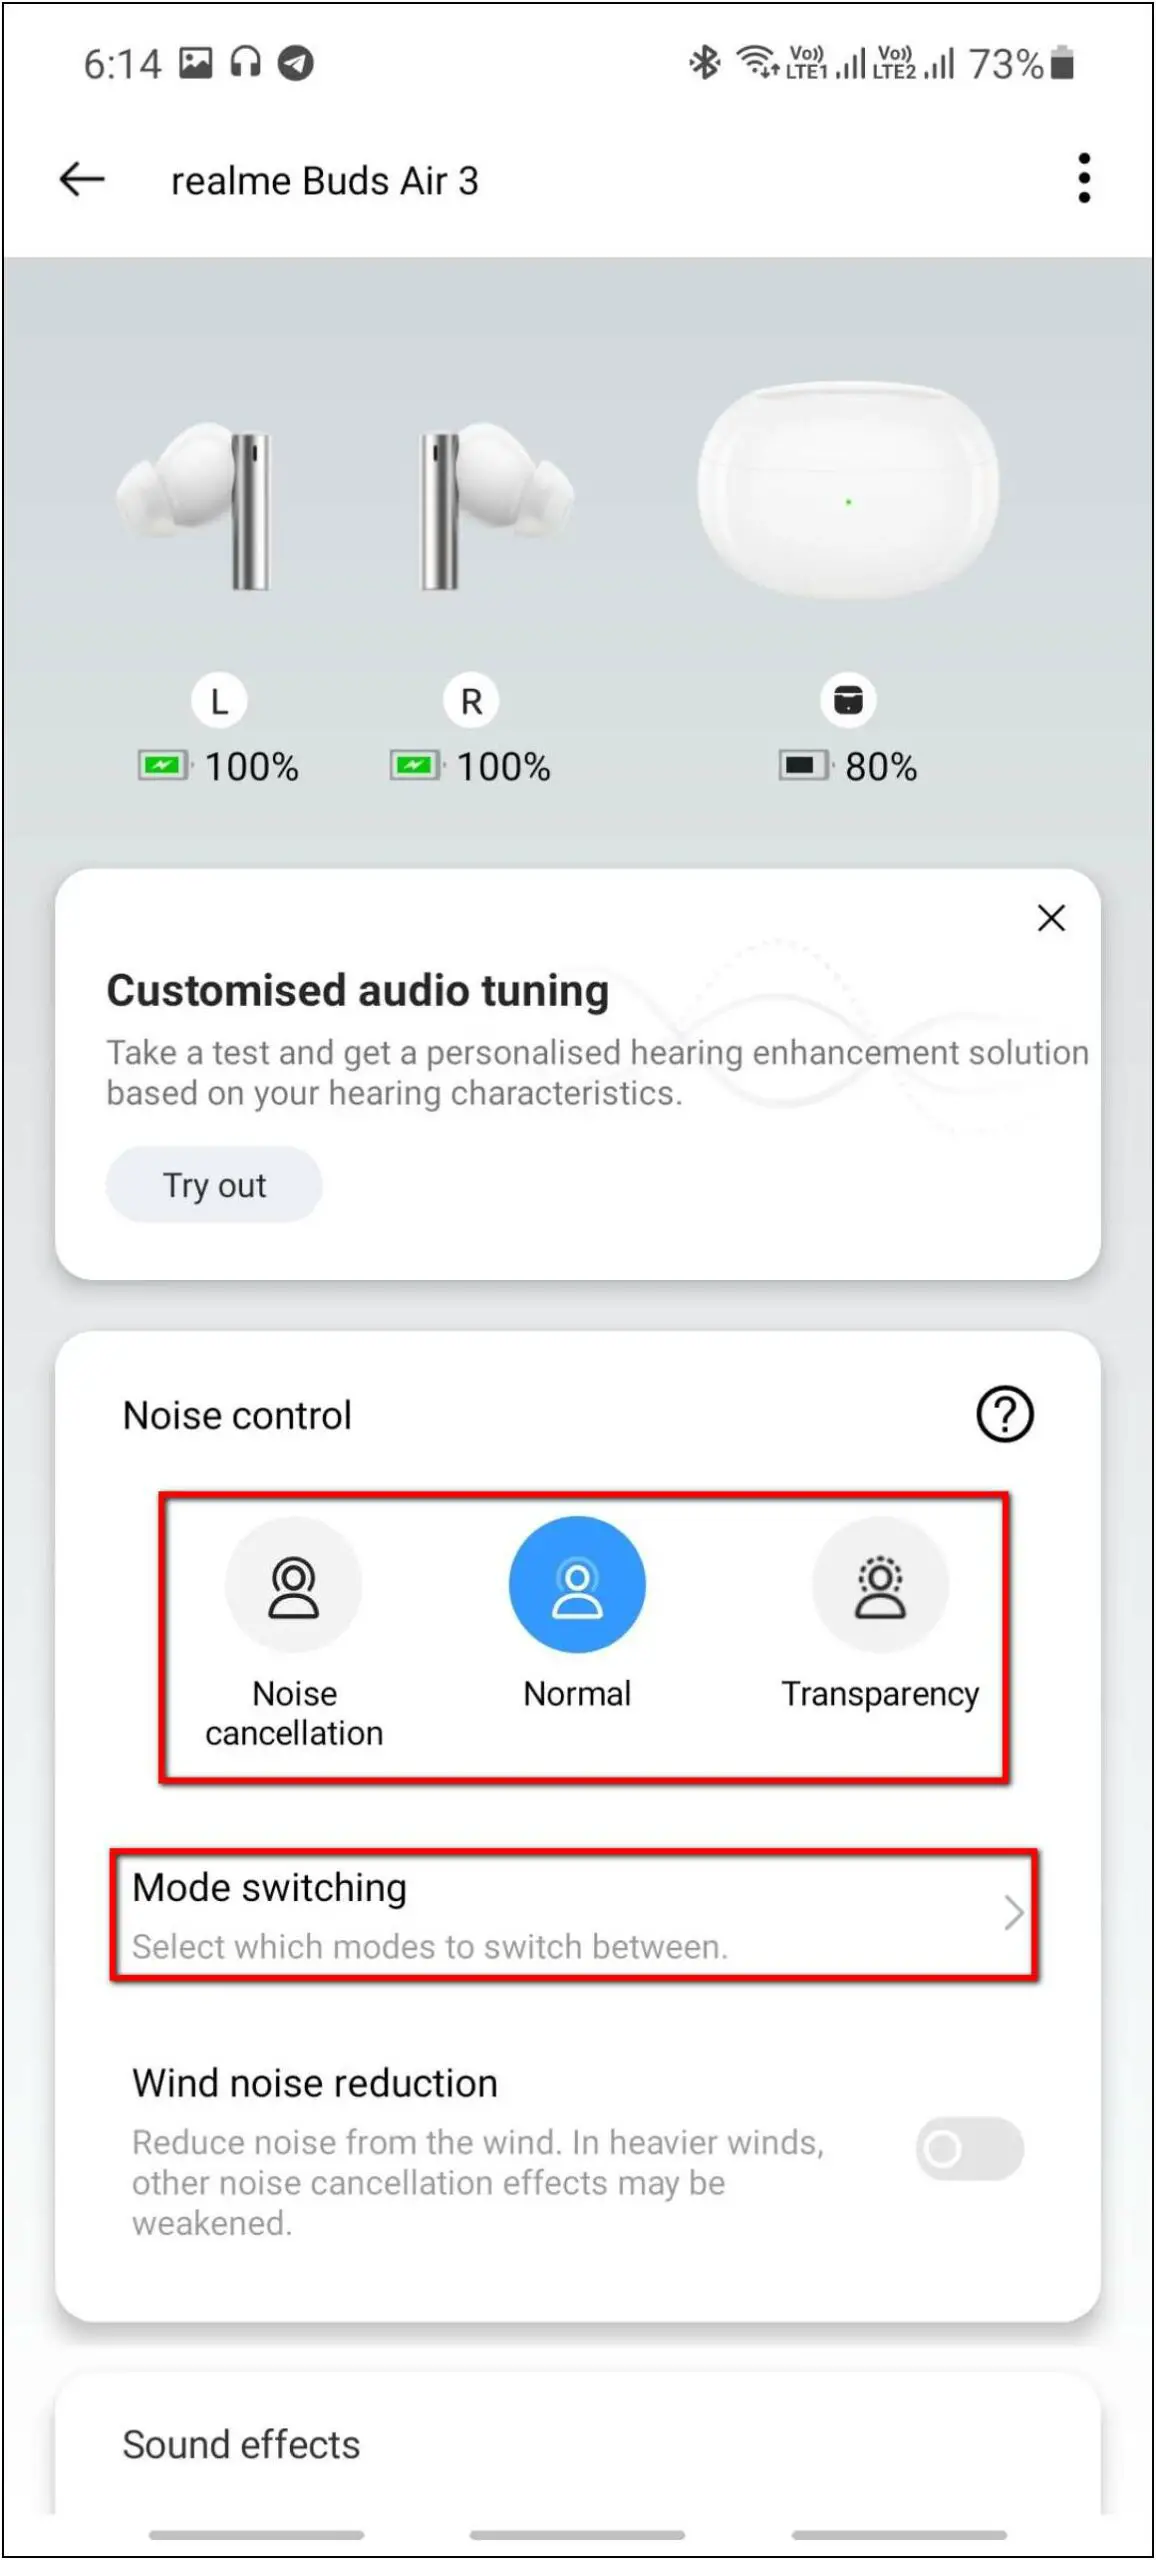 Realme Buds Air 3 Noise Control Modes